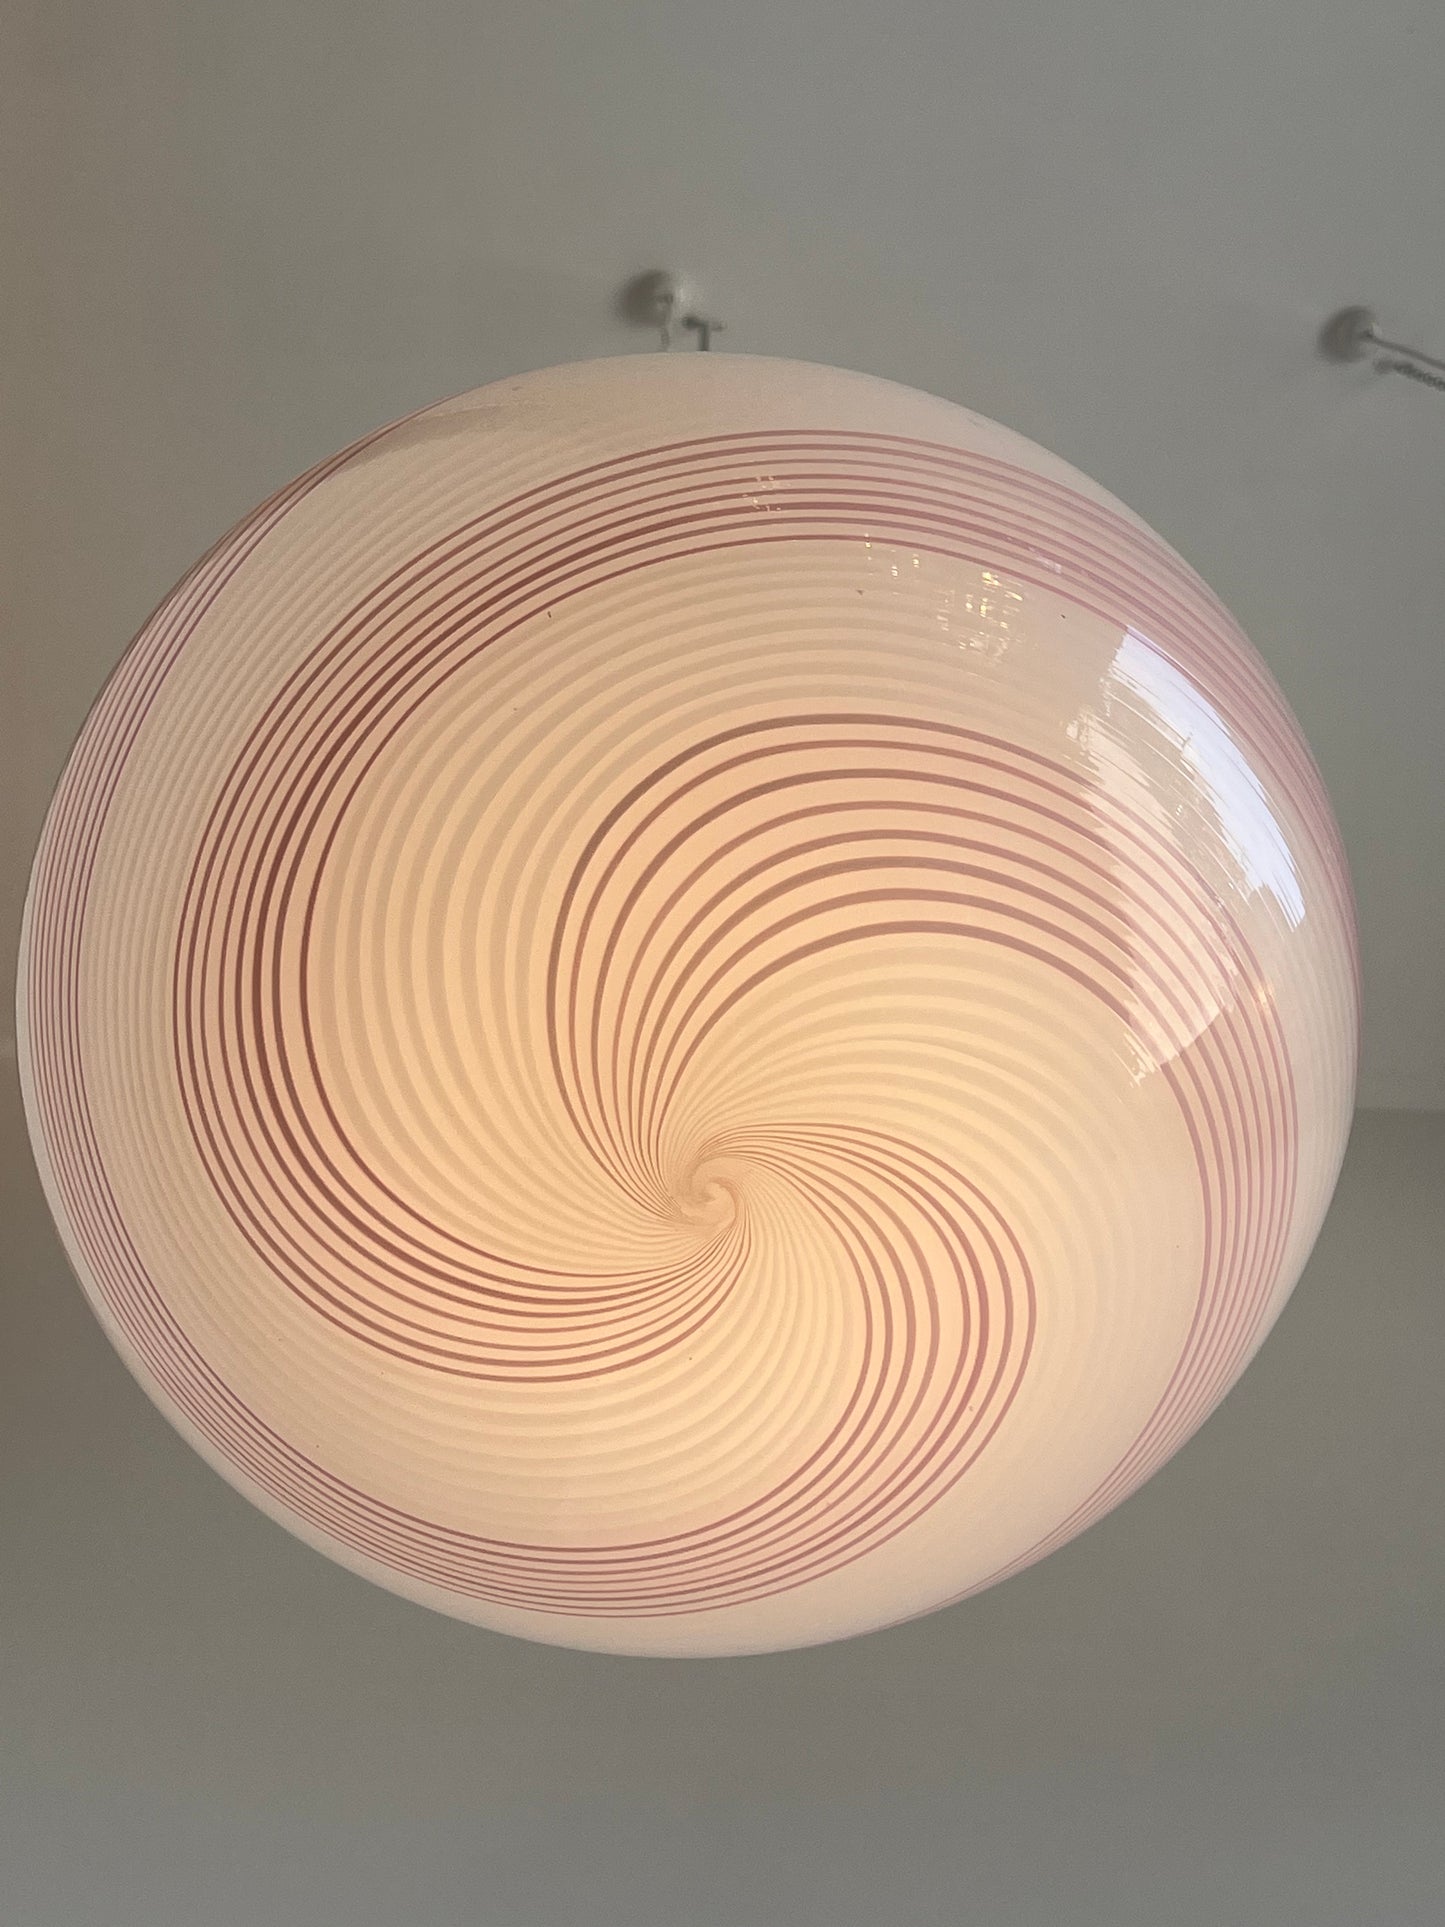 Paolo Venini Murano Glass and Brass With Light Pink Stripes Pendant Light, 1960s